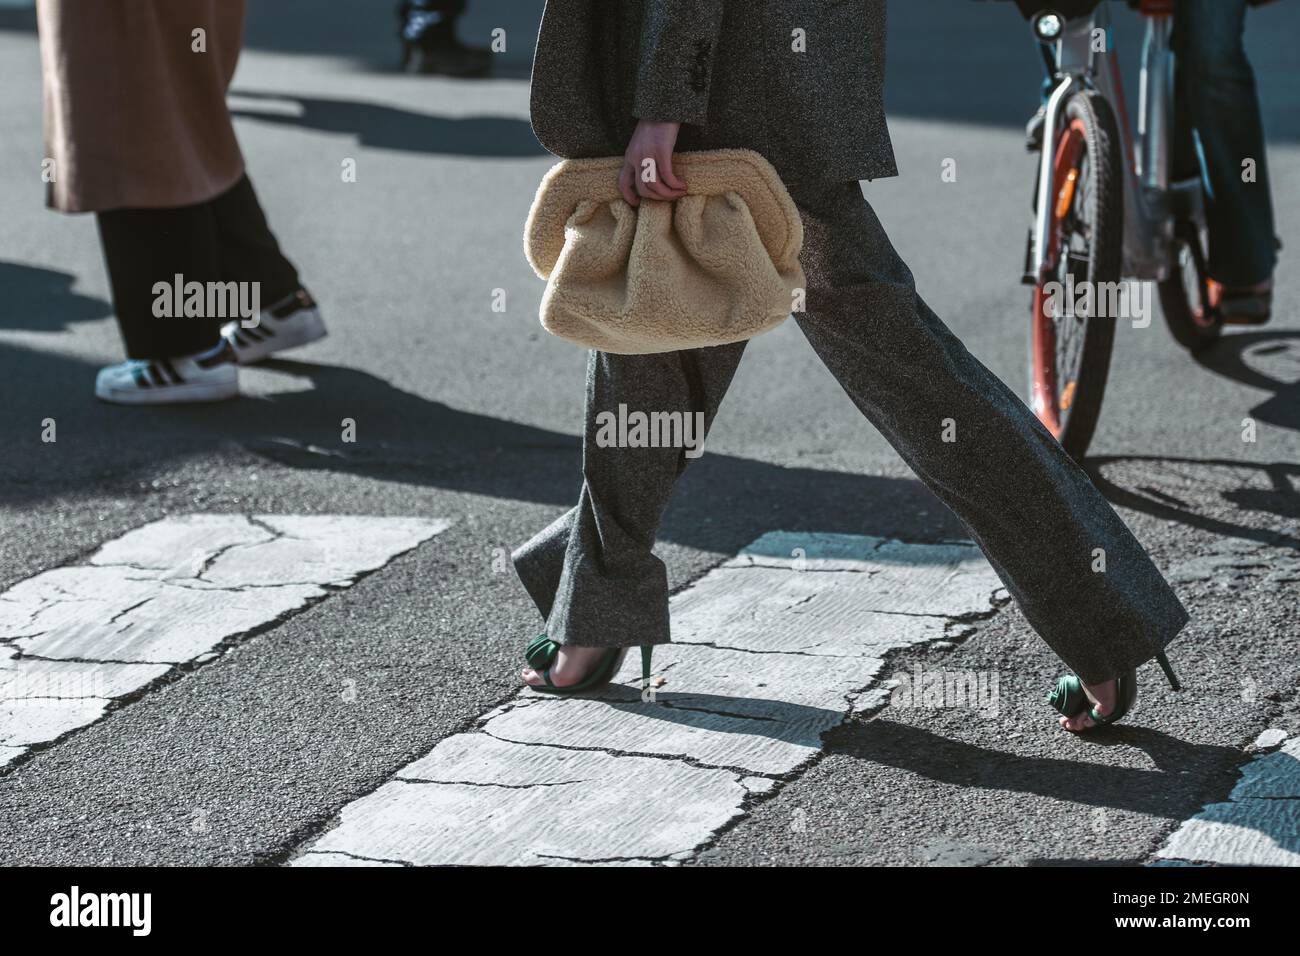 fashion, streetstyle, street style, modern, model, wear, female, handbag, trendy, casual, fashionable, design, clothing, shoes, editorial, look, outfi Stock Photo